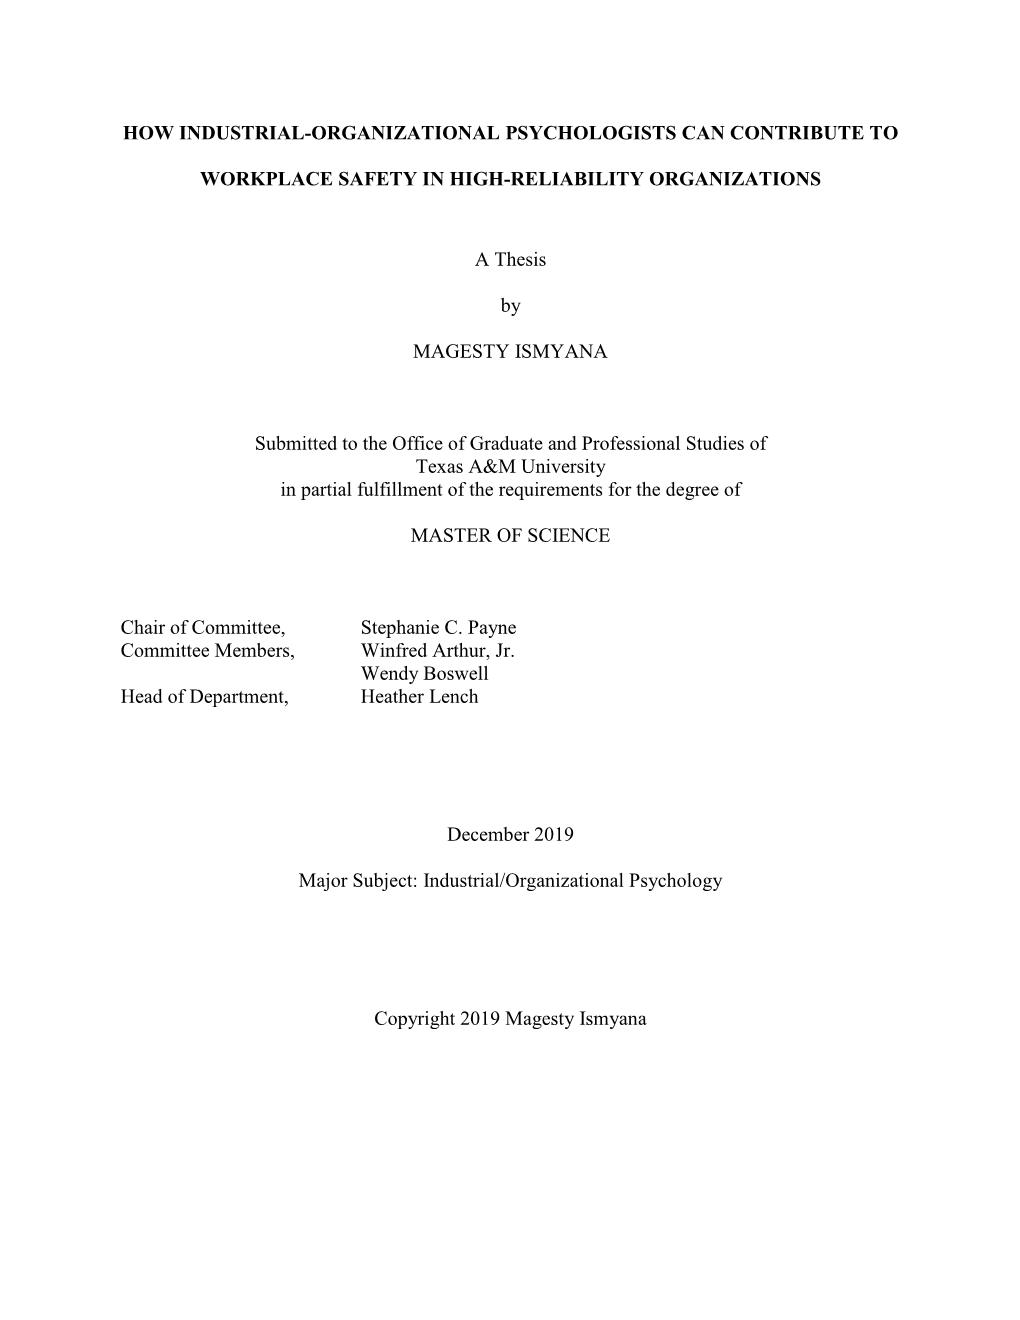 HOW INDUSTRIAL-ORGANIZATIONAL PSYCHOLOGISTS CAN CONTRIBUTE to WORKPLACE SAFETY in HIGH-RELIABILITY ORGANIZATIONS a Thesis By